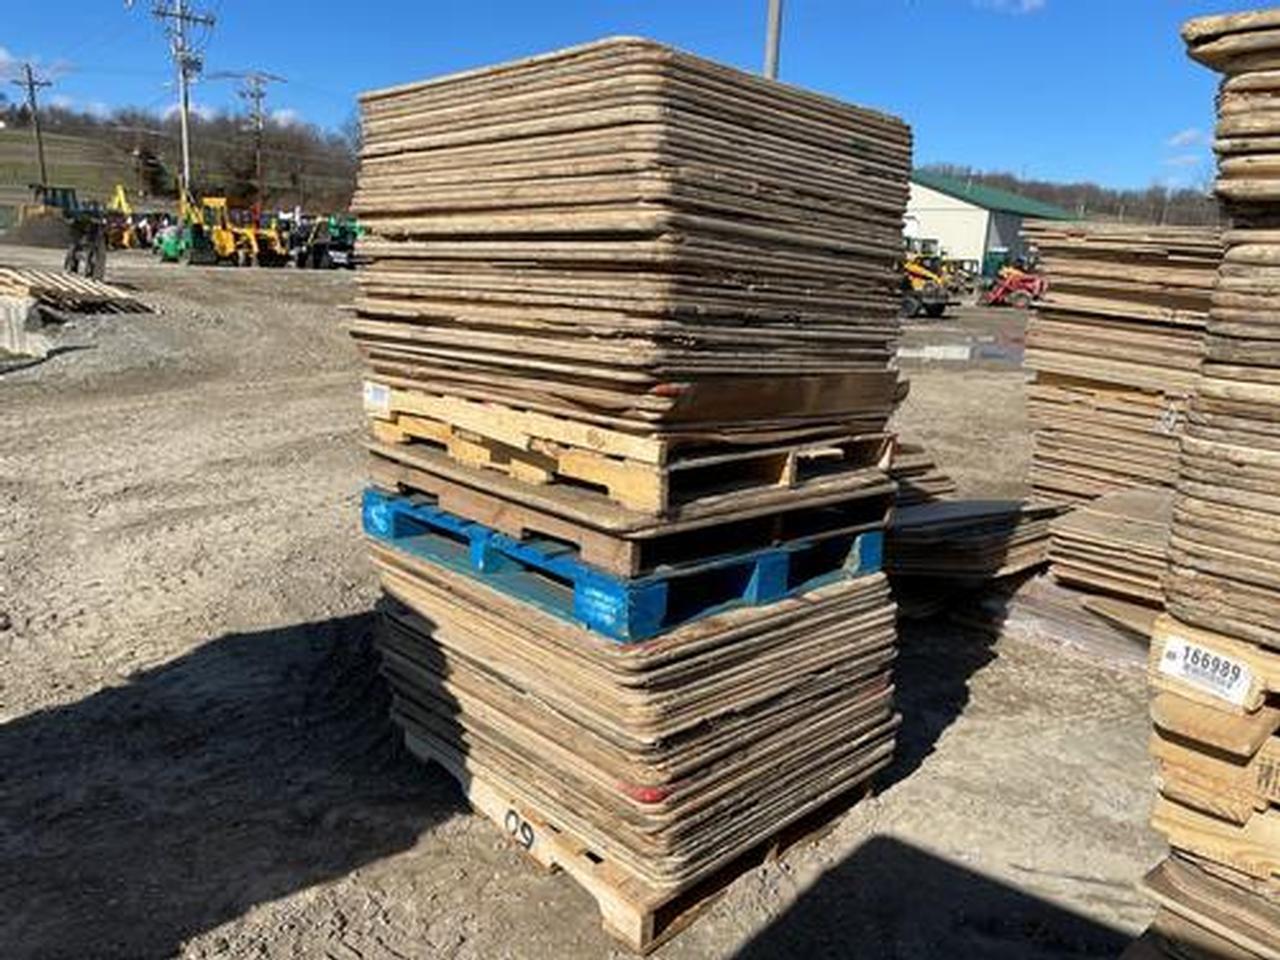 Lot Of Plywood